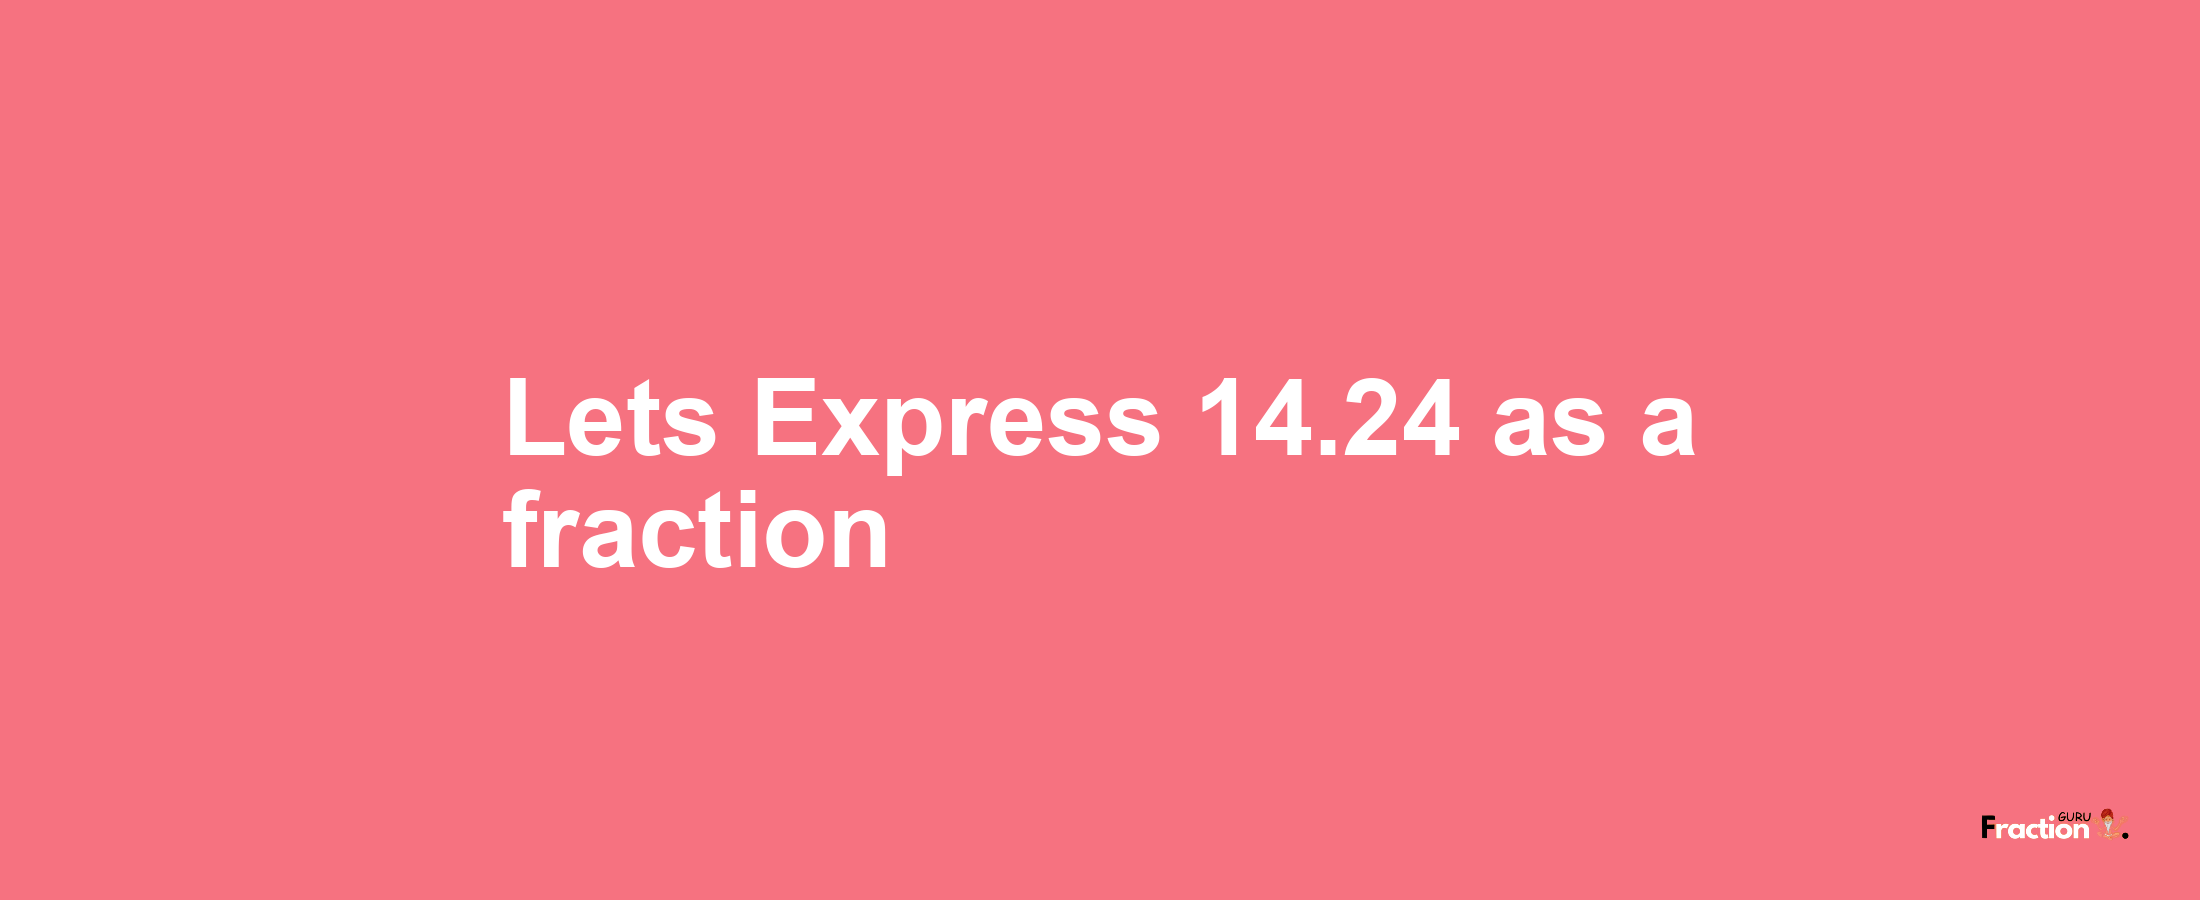 Lets Express 14.24 as afraction